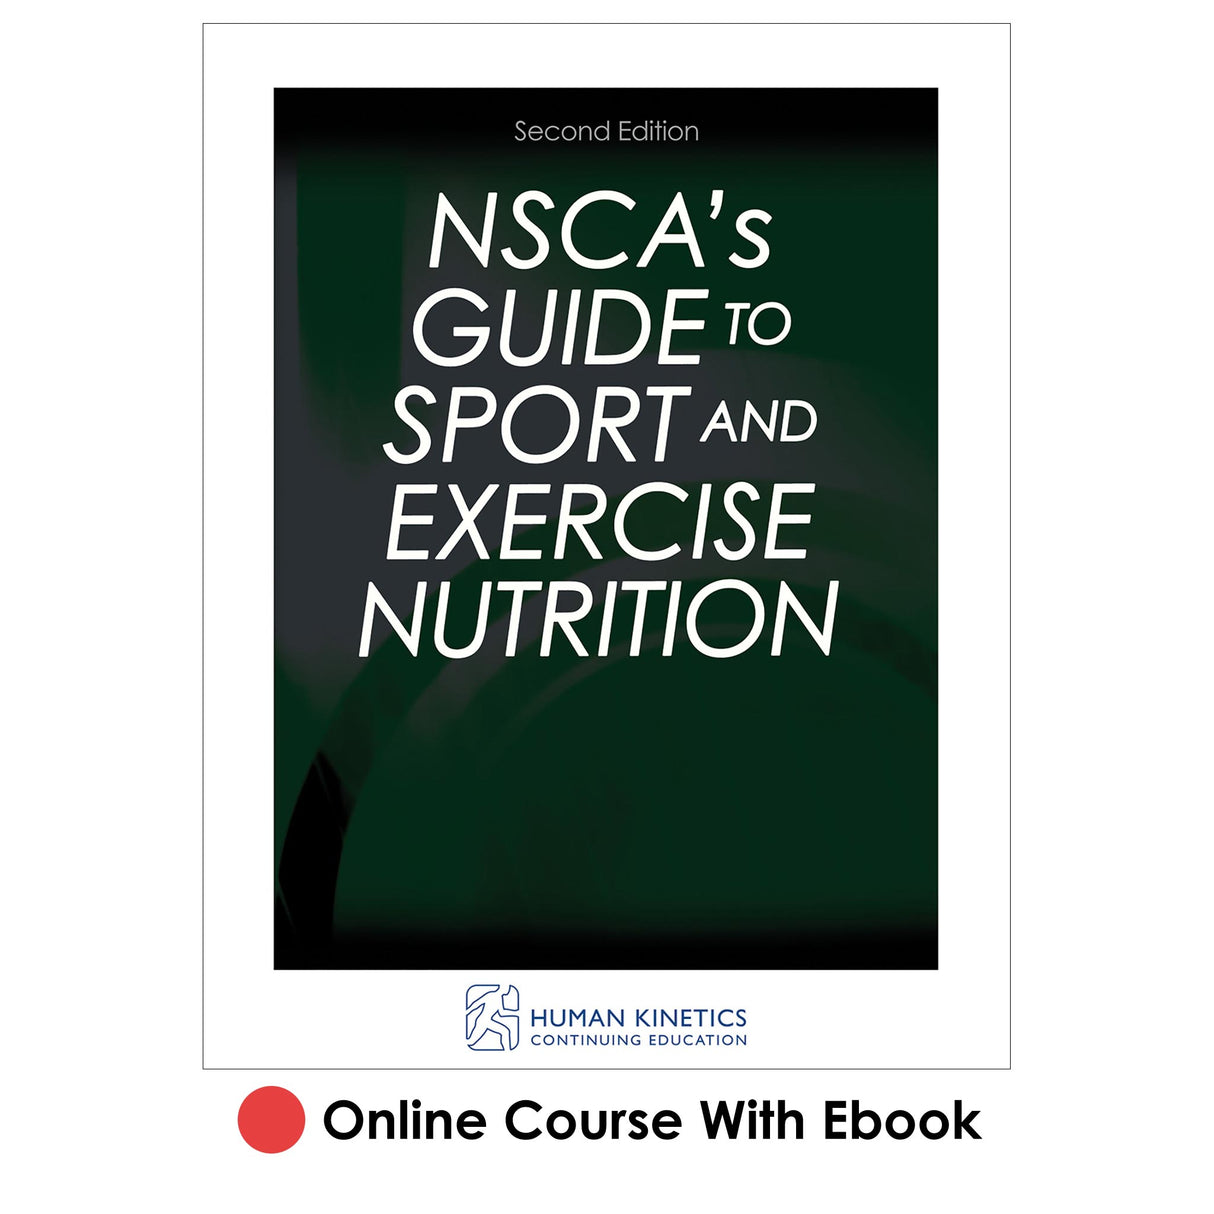 NSCA's Guide to Sport and Exercise Nutrition 2nd Edition Online CE Course With Ebook